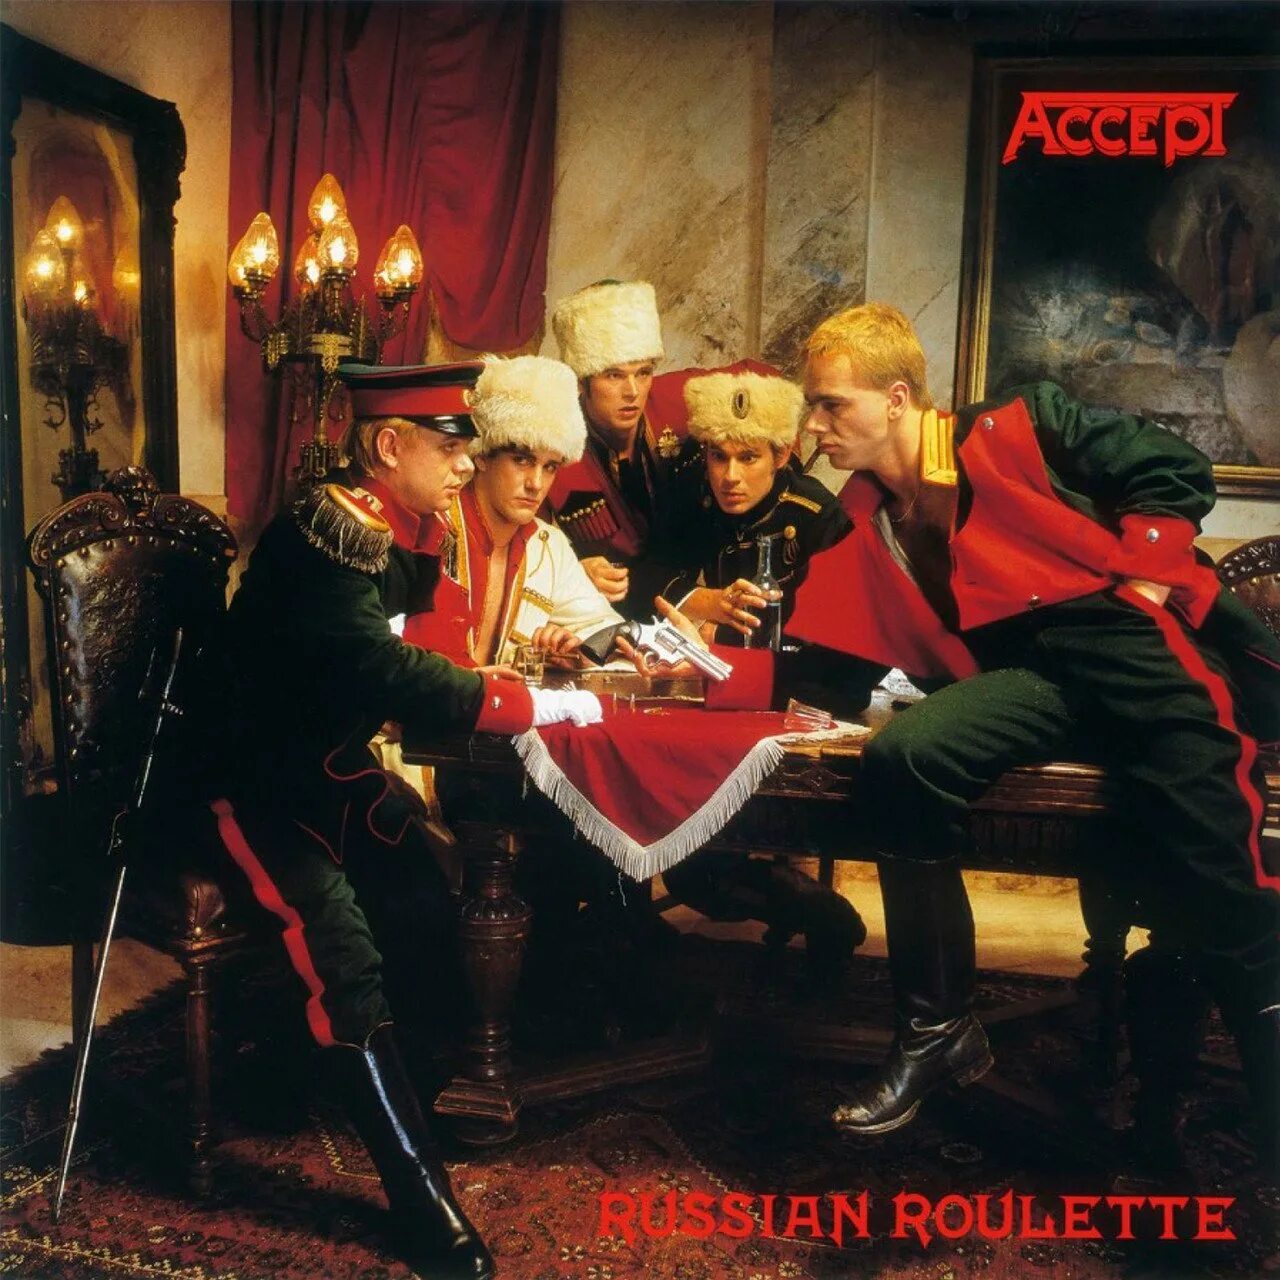 Accept full. 1986 - Russian Roulette. Accept Russian Roulette 1986 обложка. Accept Russian Roulette обложка альбома. Accept 1986 Russian Roulette обложка альбома.